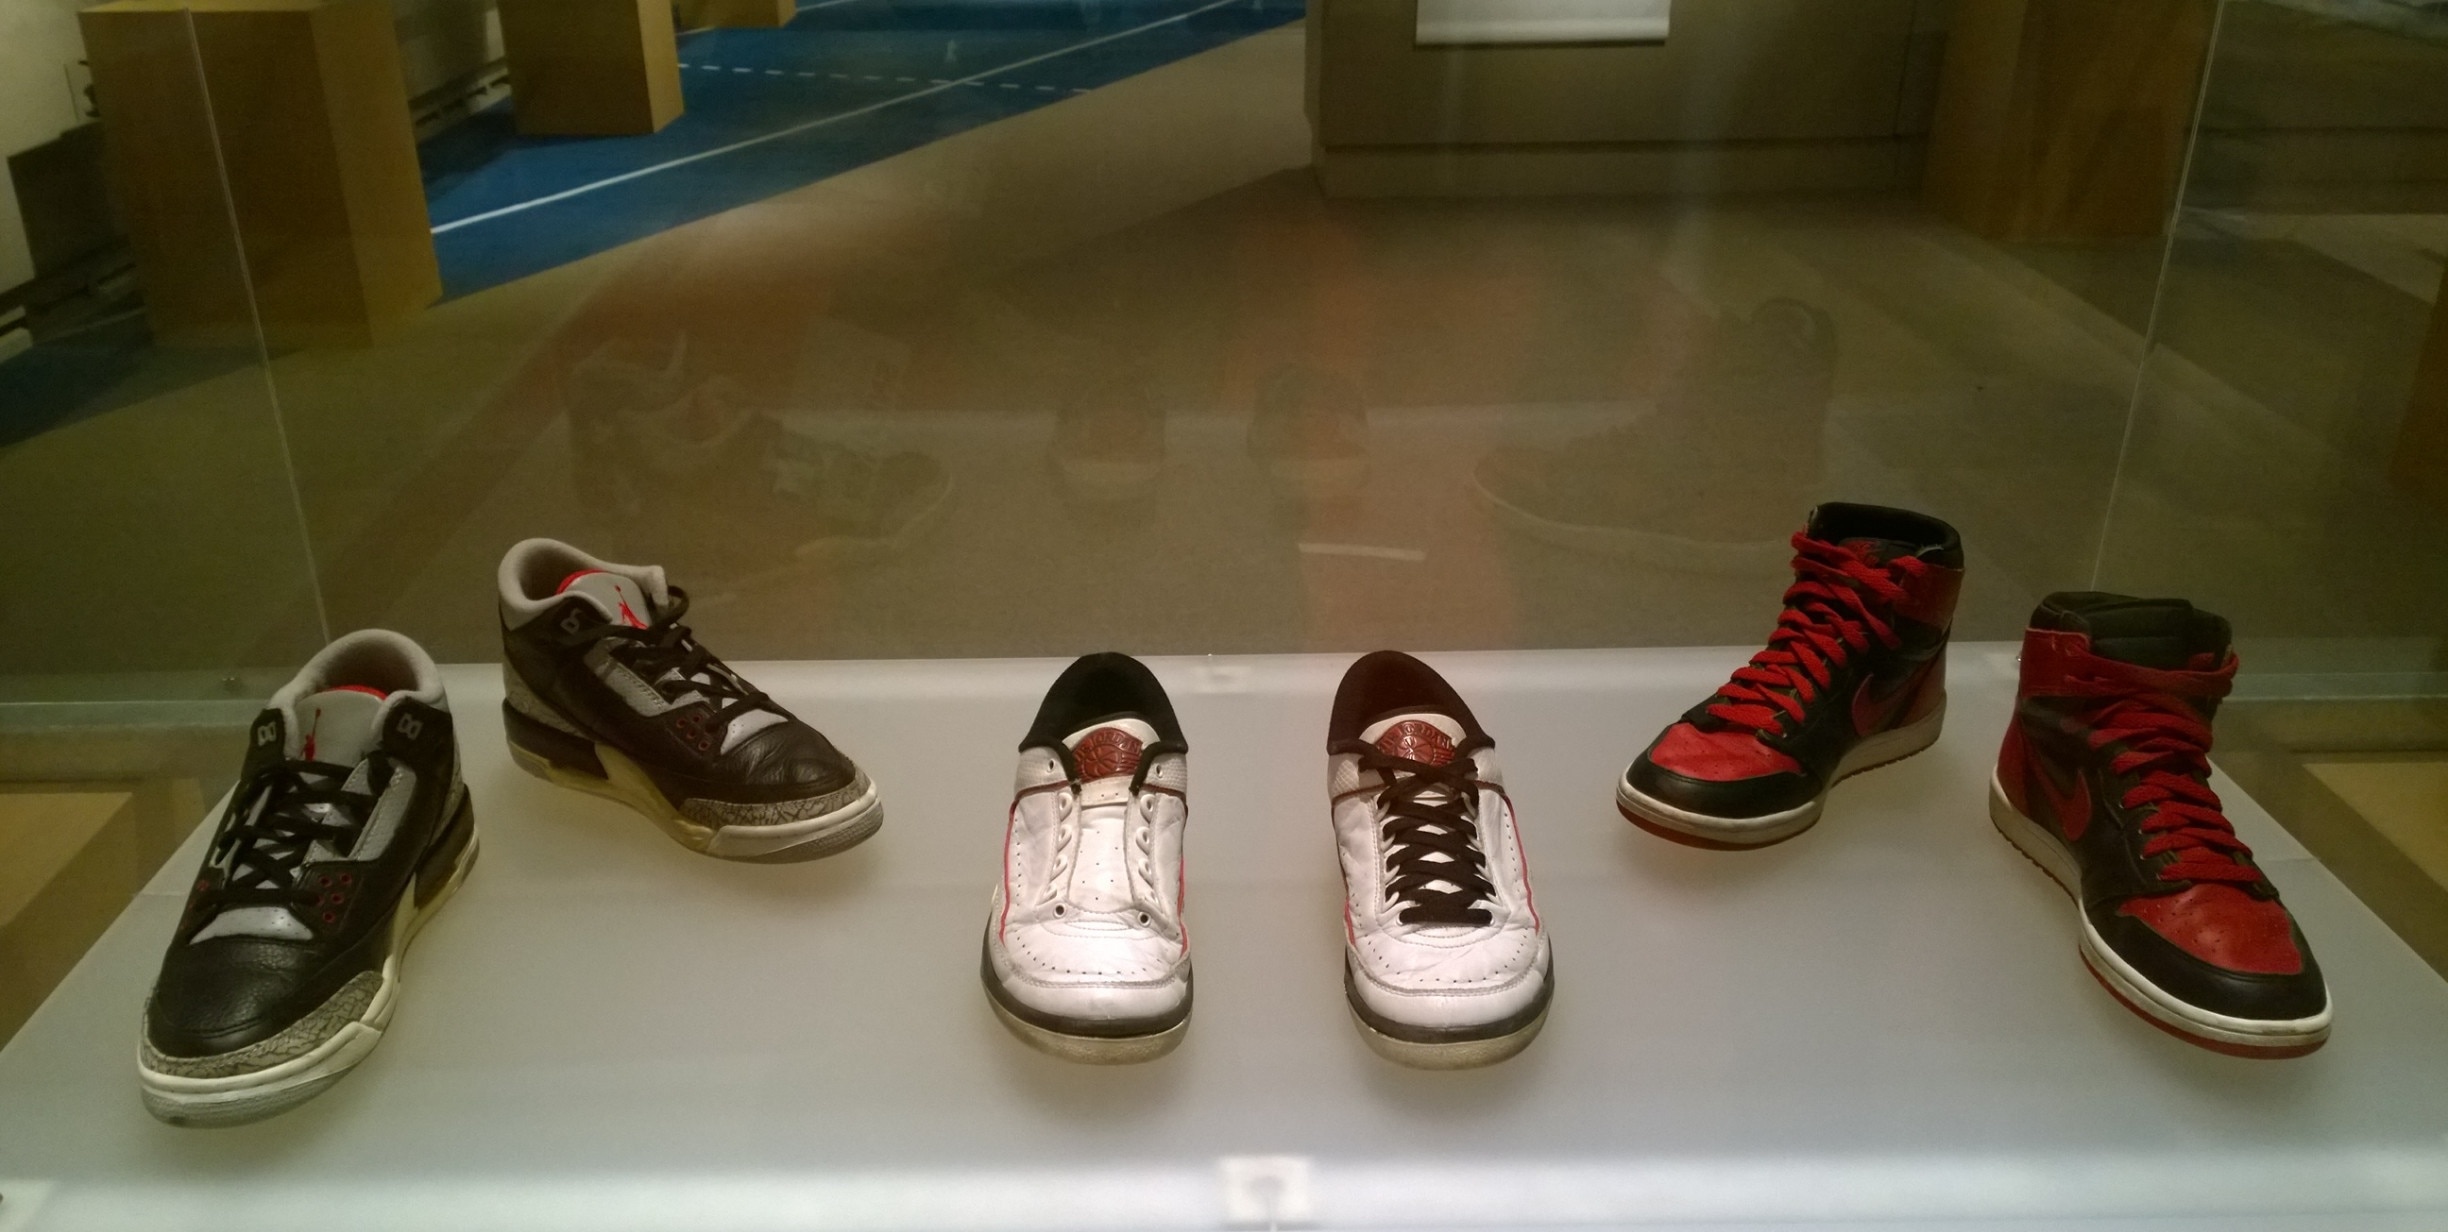 The first three releases in the Air Jordan series, a part of the #SneakerCulture exhibit.

The Rise of Sneaker Culture at the Toledo Museum of art explores the athletic shoe from its origins in the mid-1800s to its current place in high-fashion.